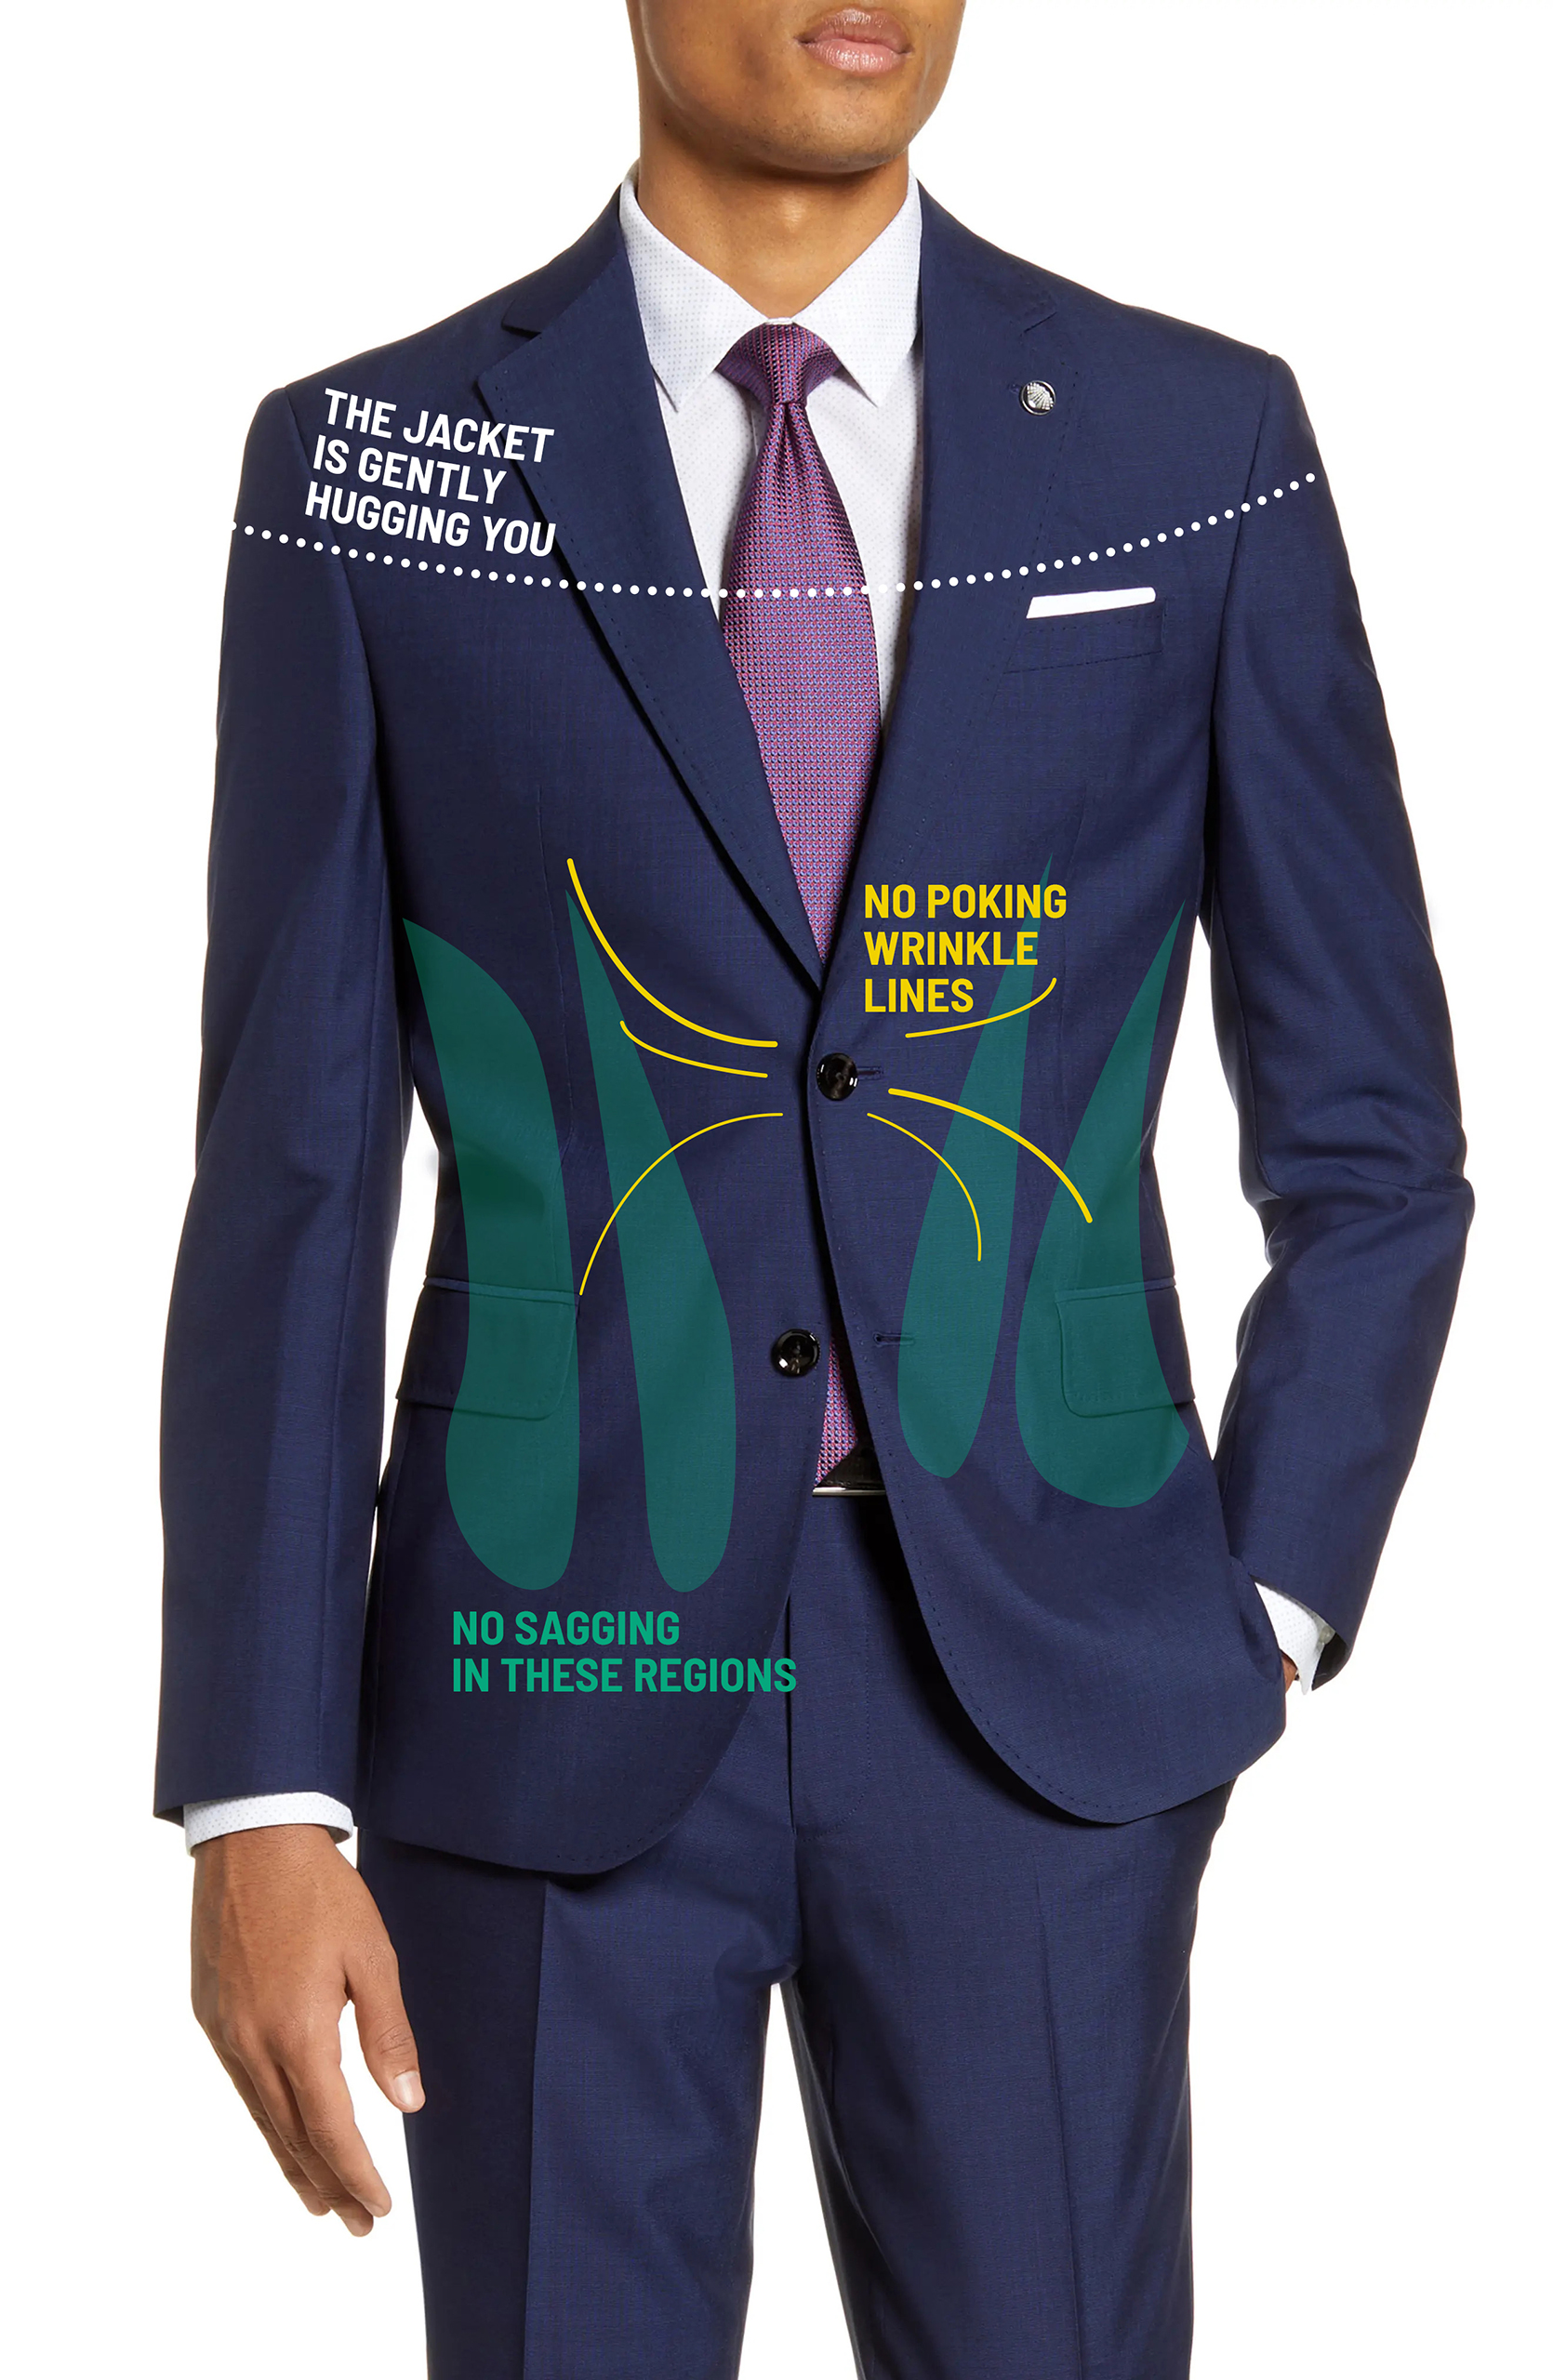 Suit jacket gently hugs the body for flawless jacket closure